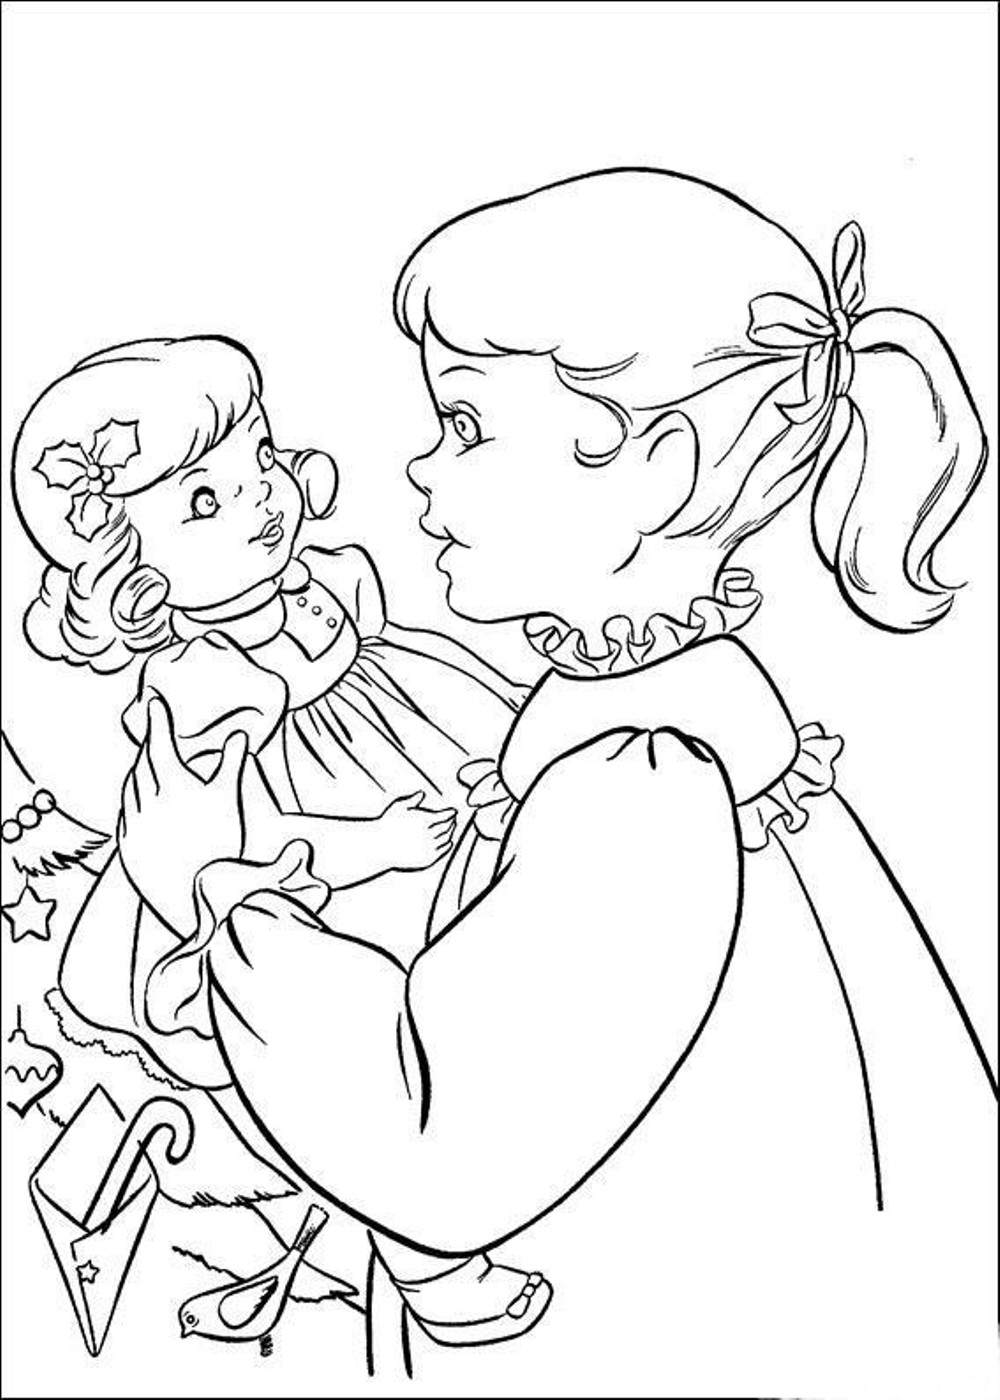 American Girl Doll Isabelle Coloring Pages
 Doll Coloring Pages coloringsuite